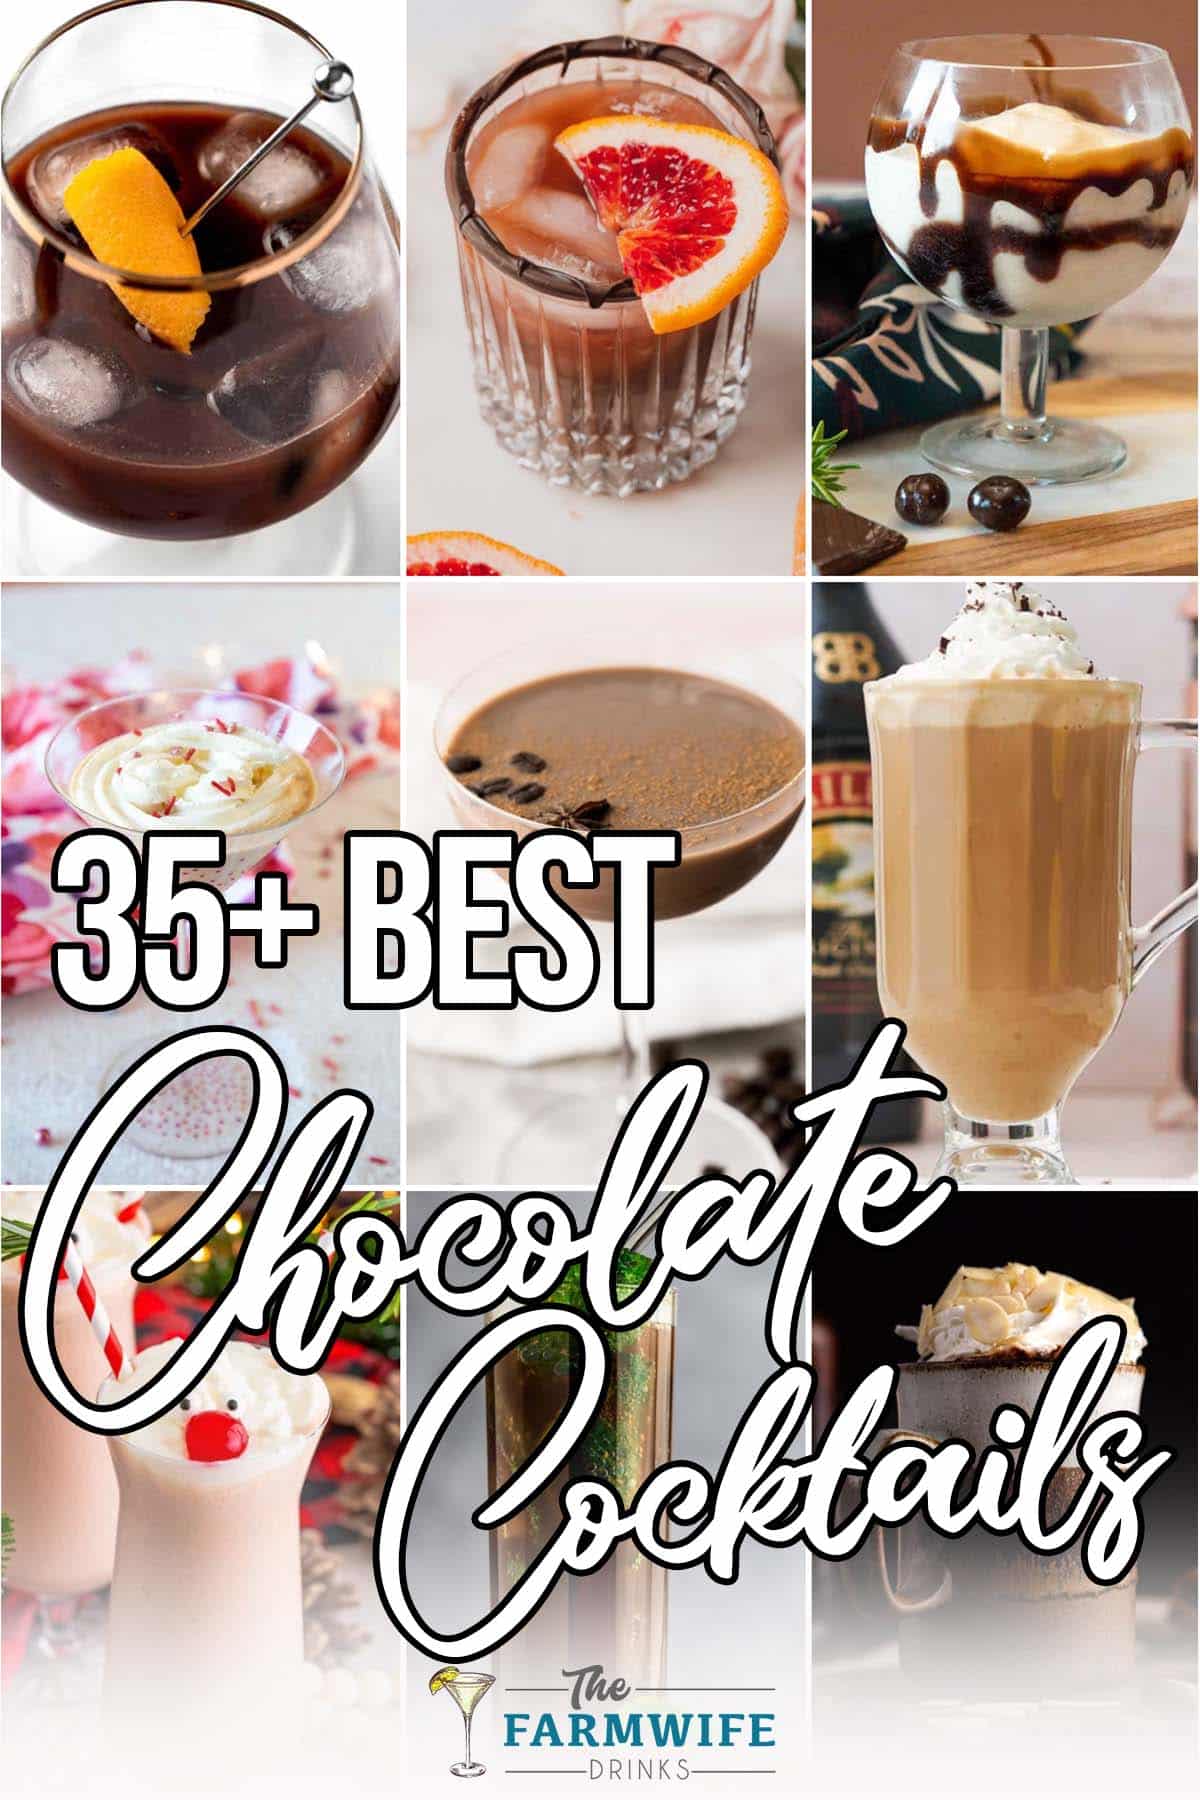 photo collage of chocolate drink recipes with text which reads 35+ best chocolate cocktails